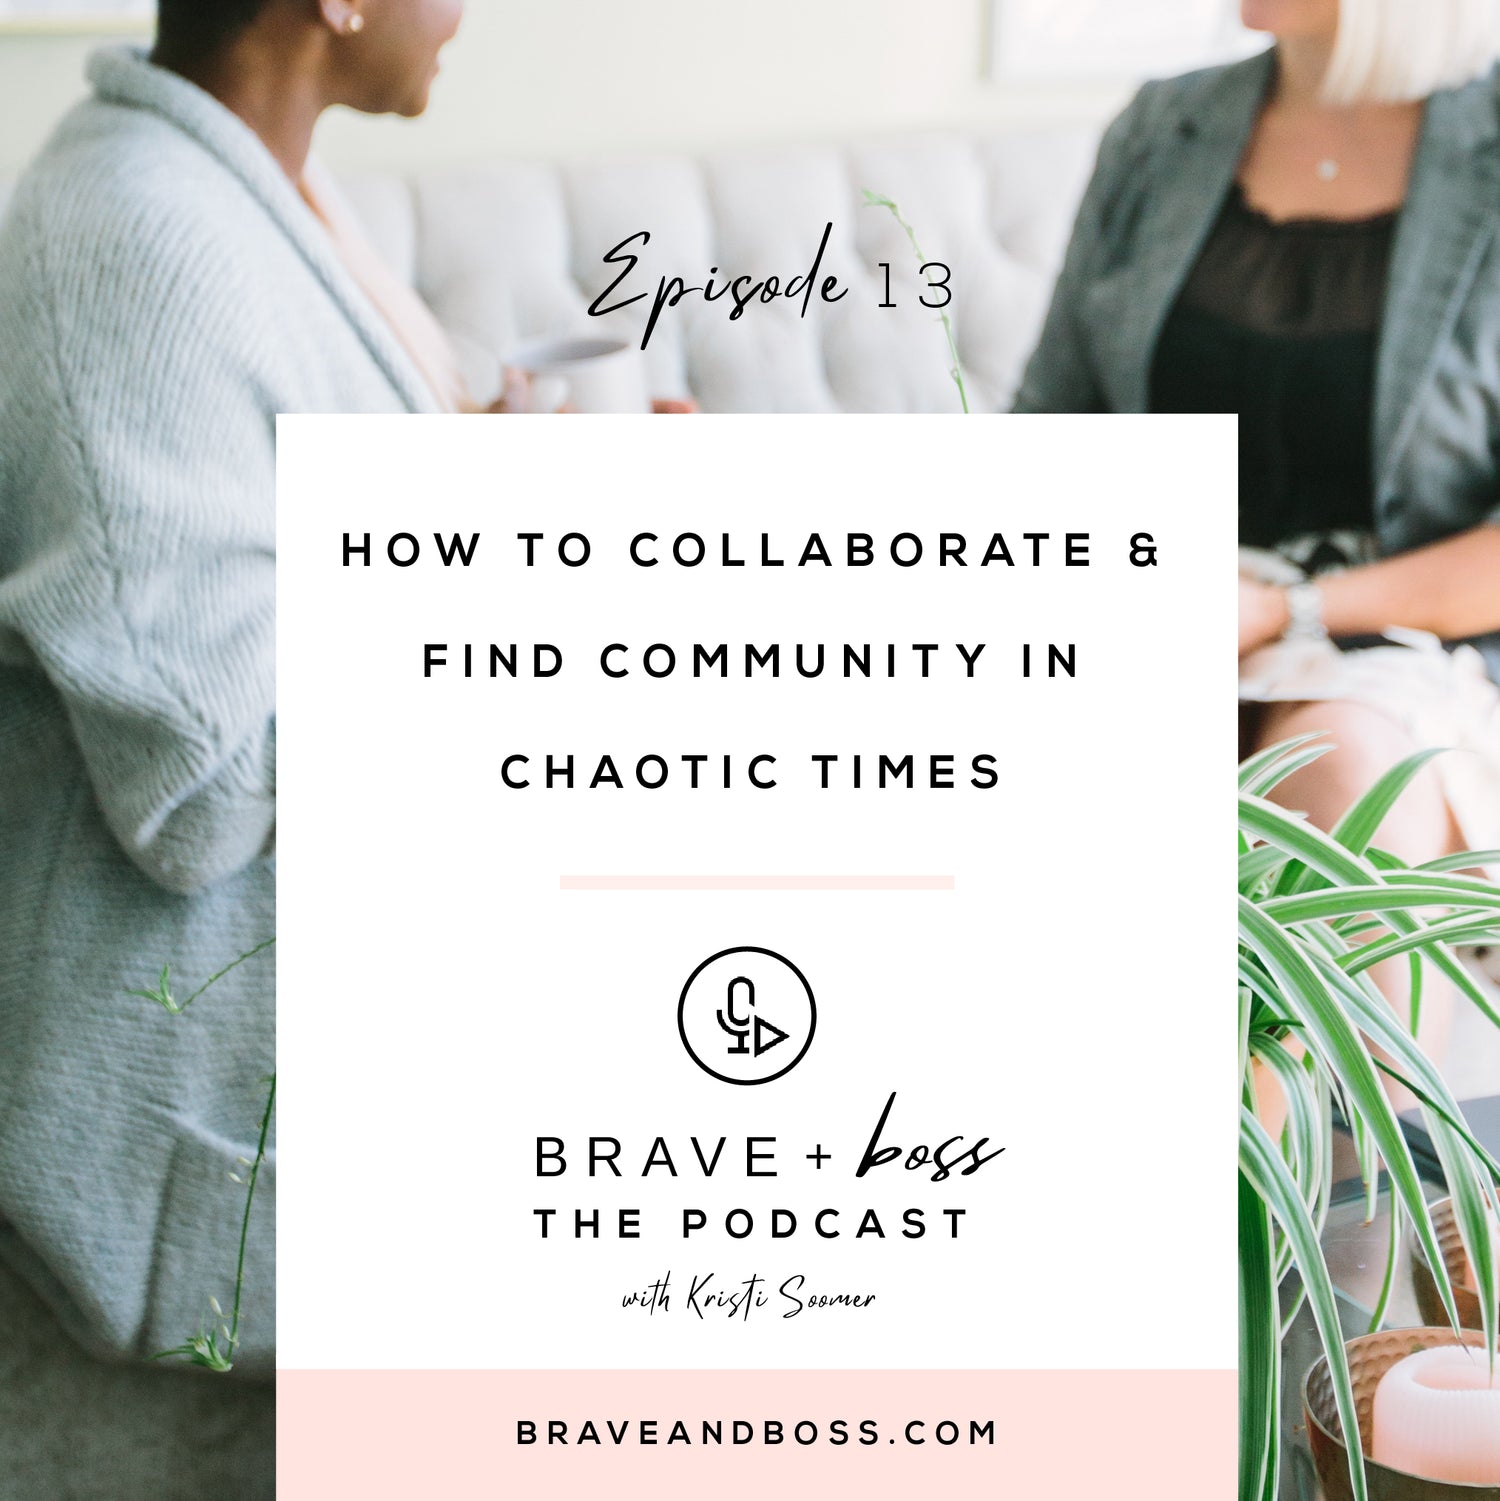 How to Collaborate & Find Community in Chaotic Times